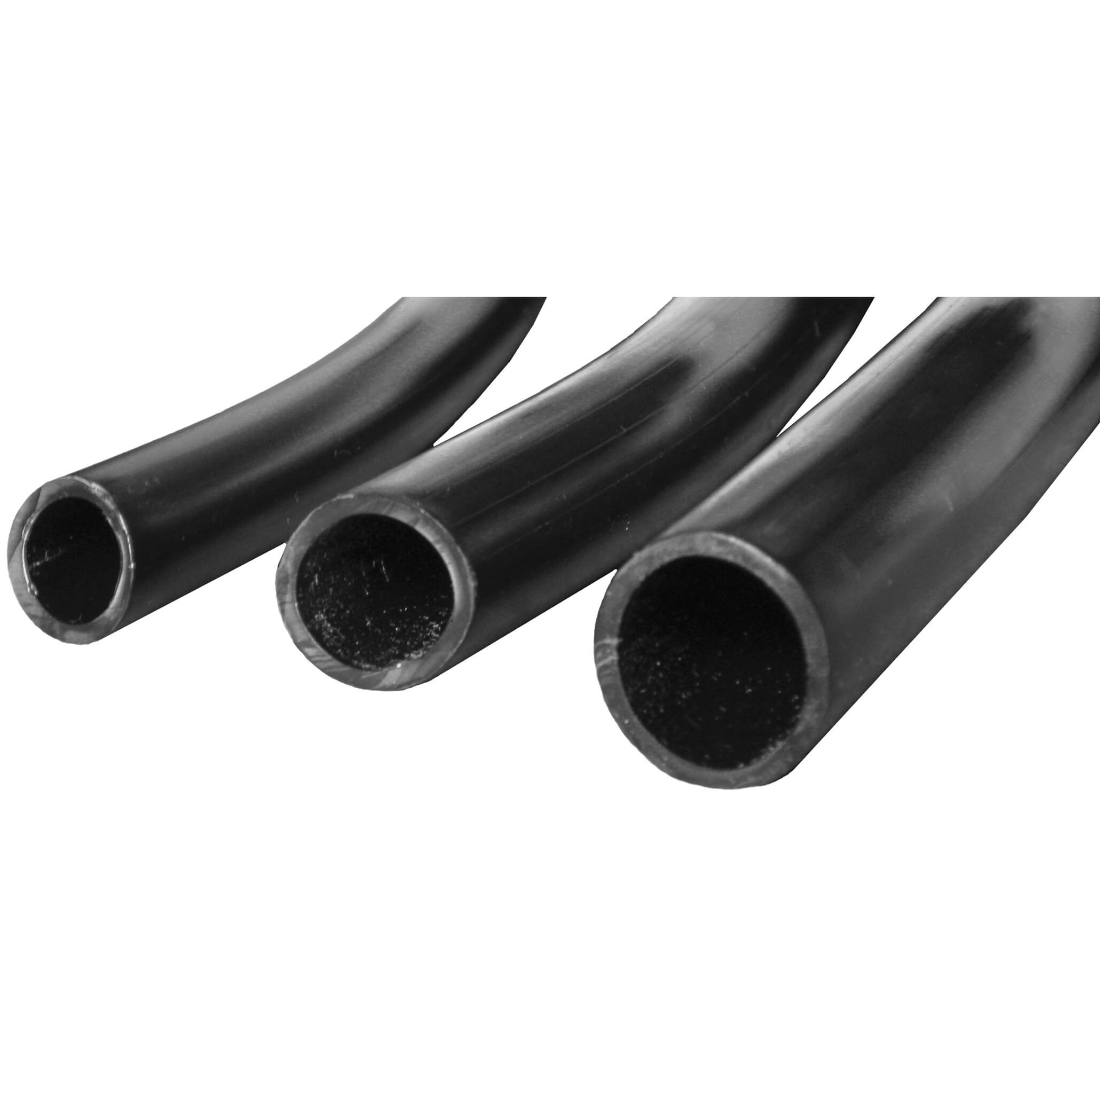 5/8'' I.D. - Polyethylene Non-Weighted Pond Aeration Airline Tubing (Can be buried or left exposed)